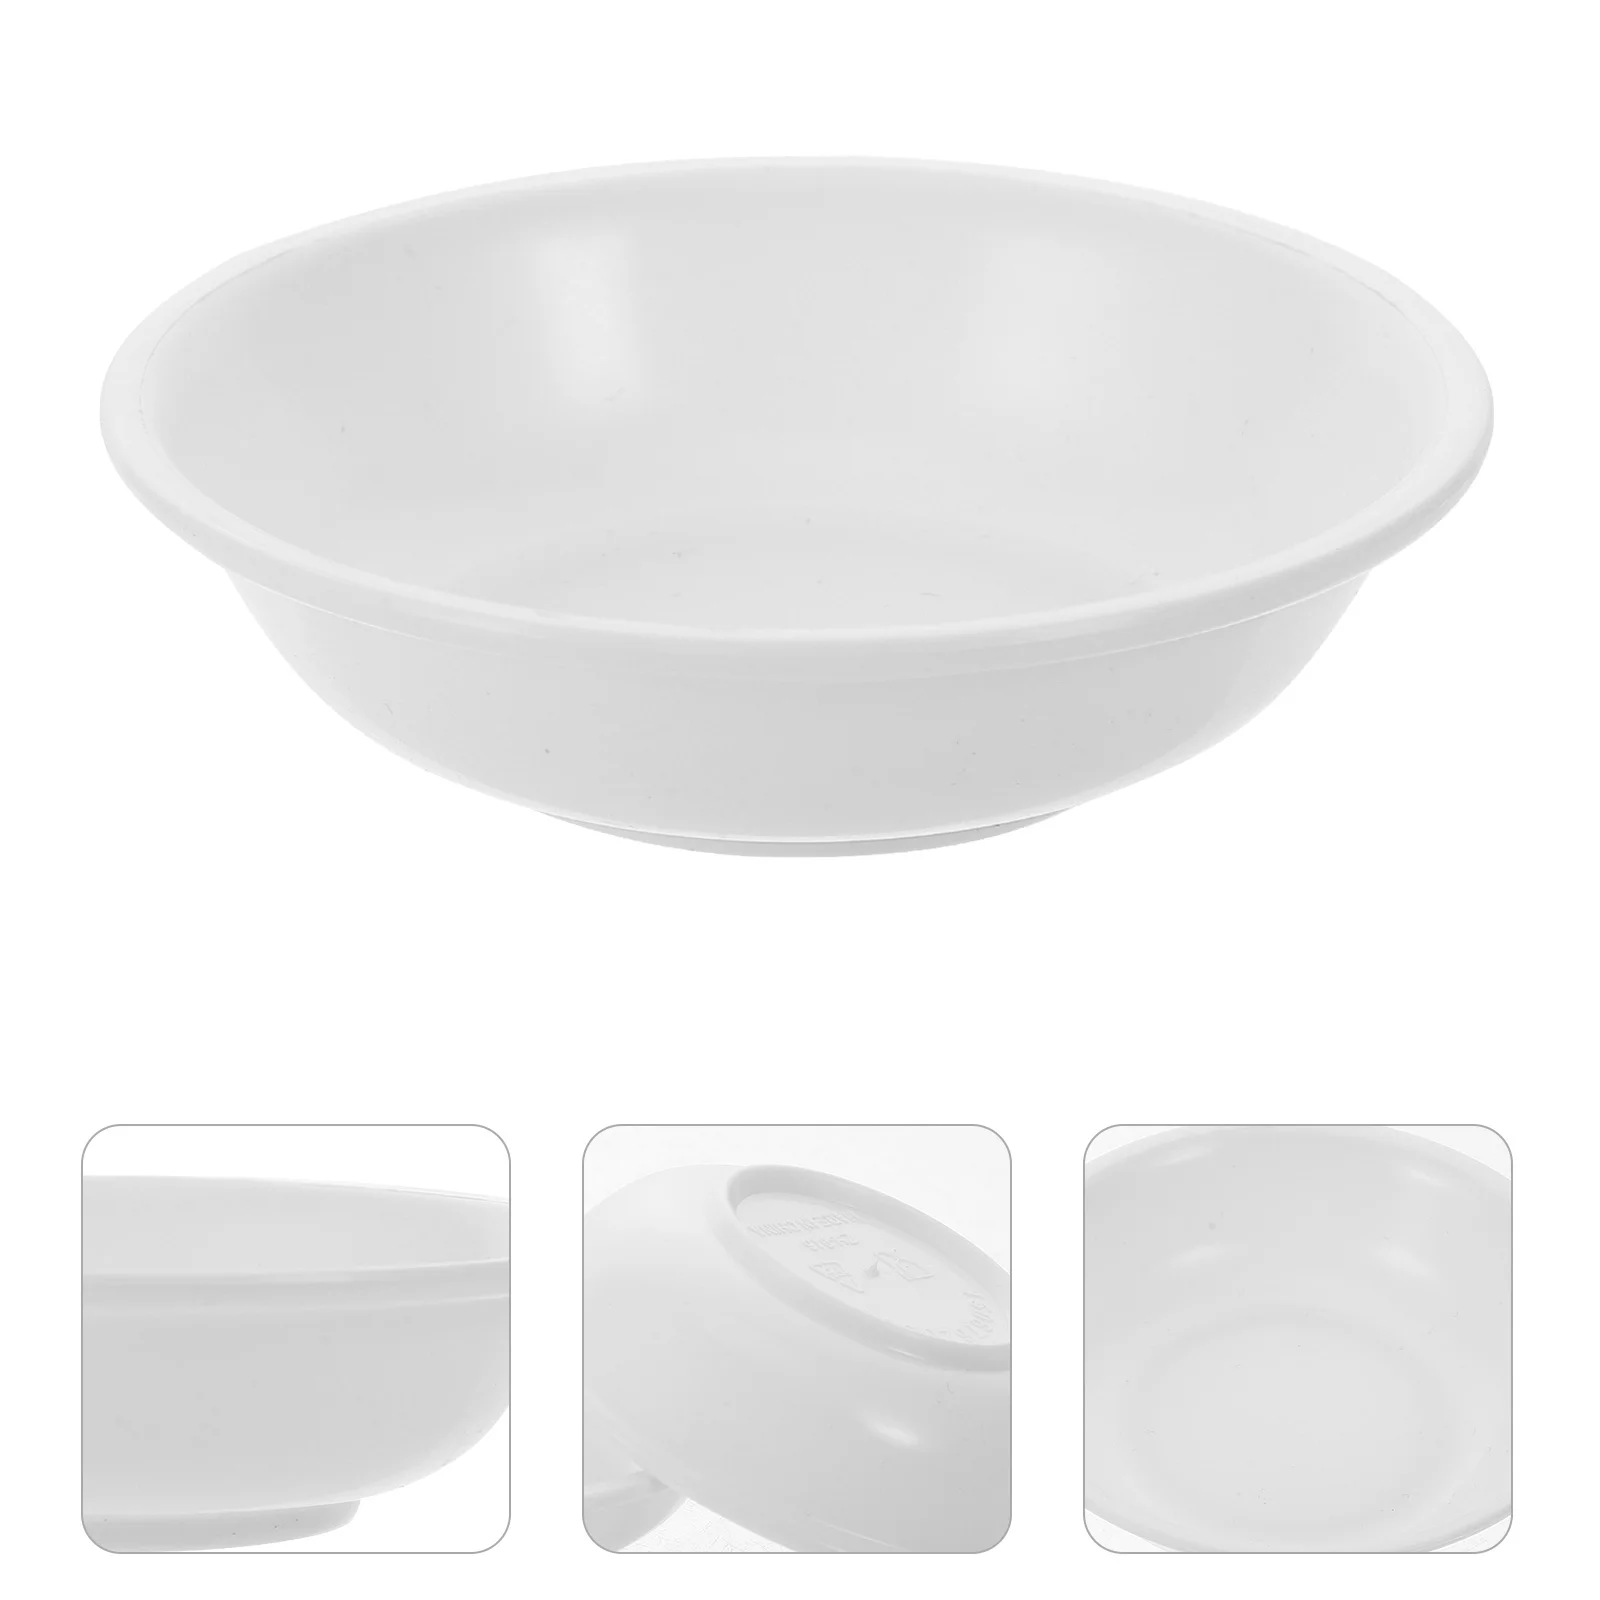 

Sauce Dipping Dish Bowls Dishes Plate Bowl Soy Seasoning Condiment Appetizer Plates Tray Serving Cups Mini Plastic Side Sushi